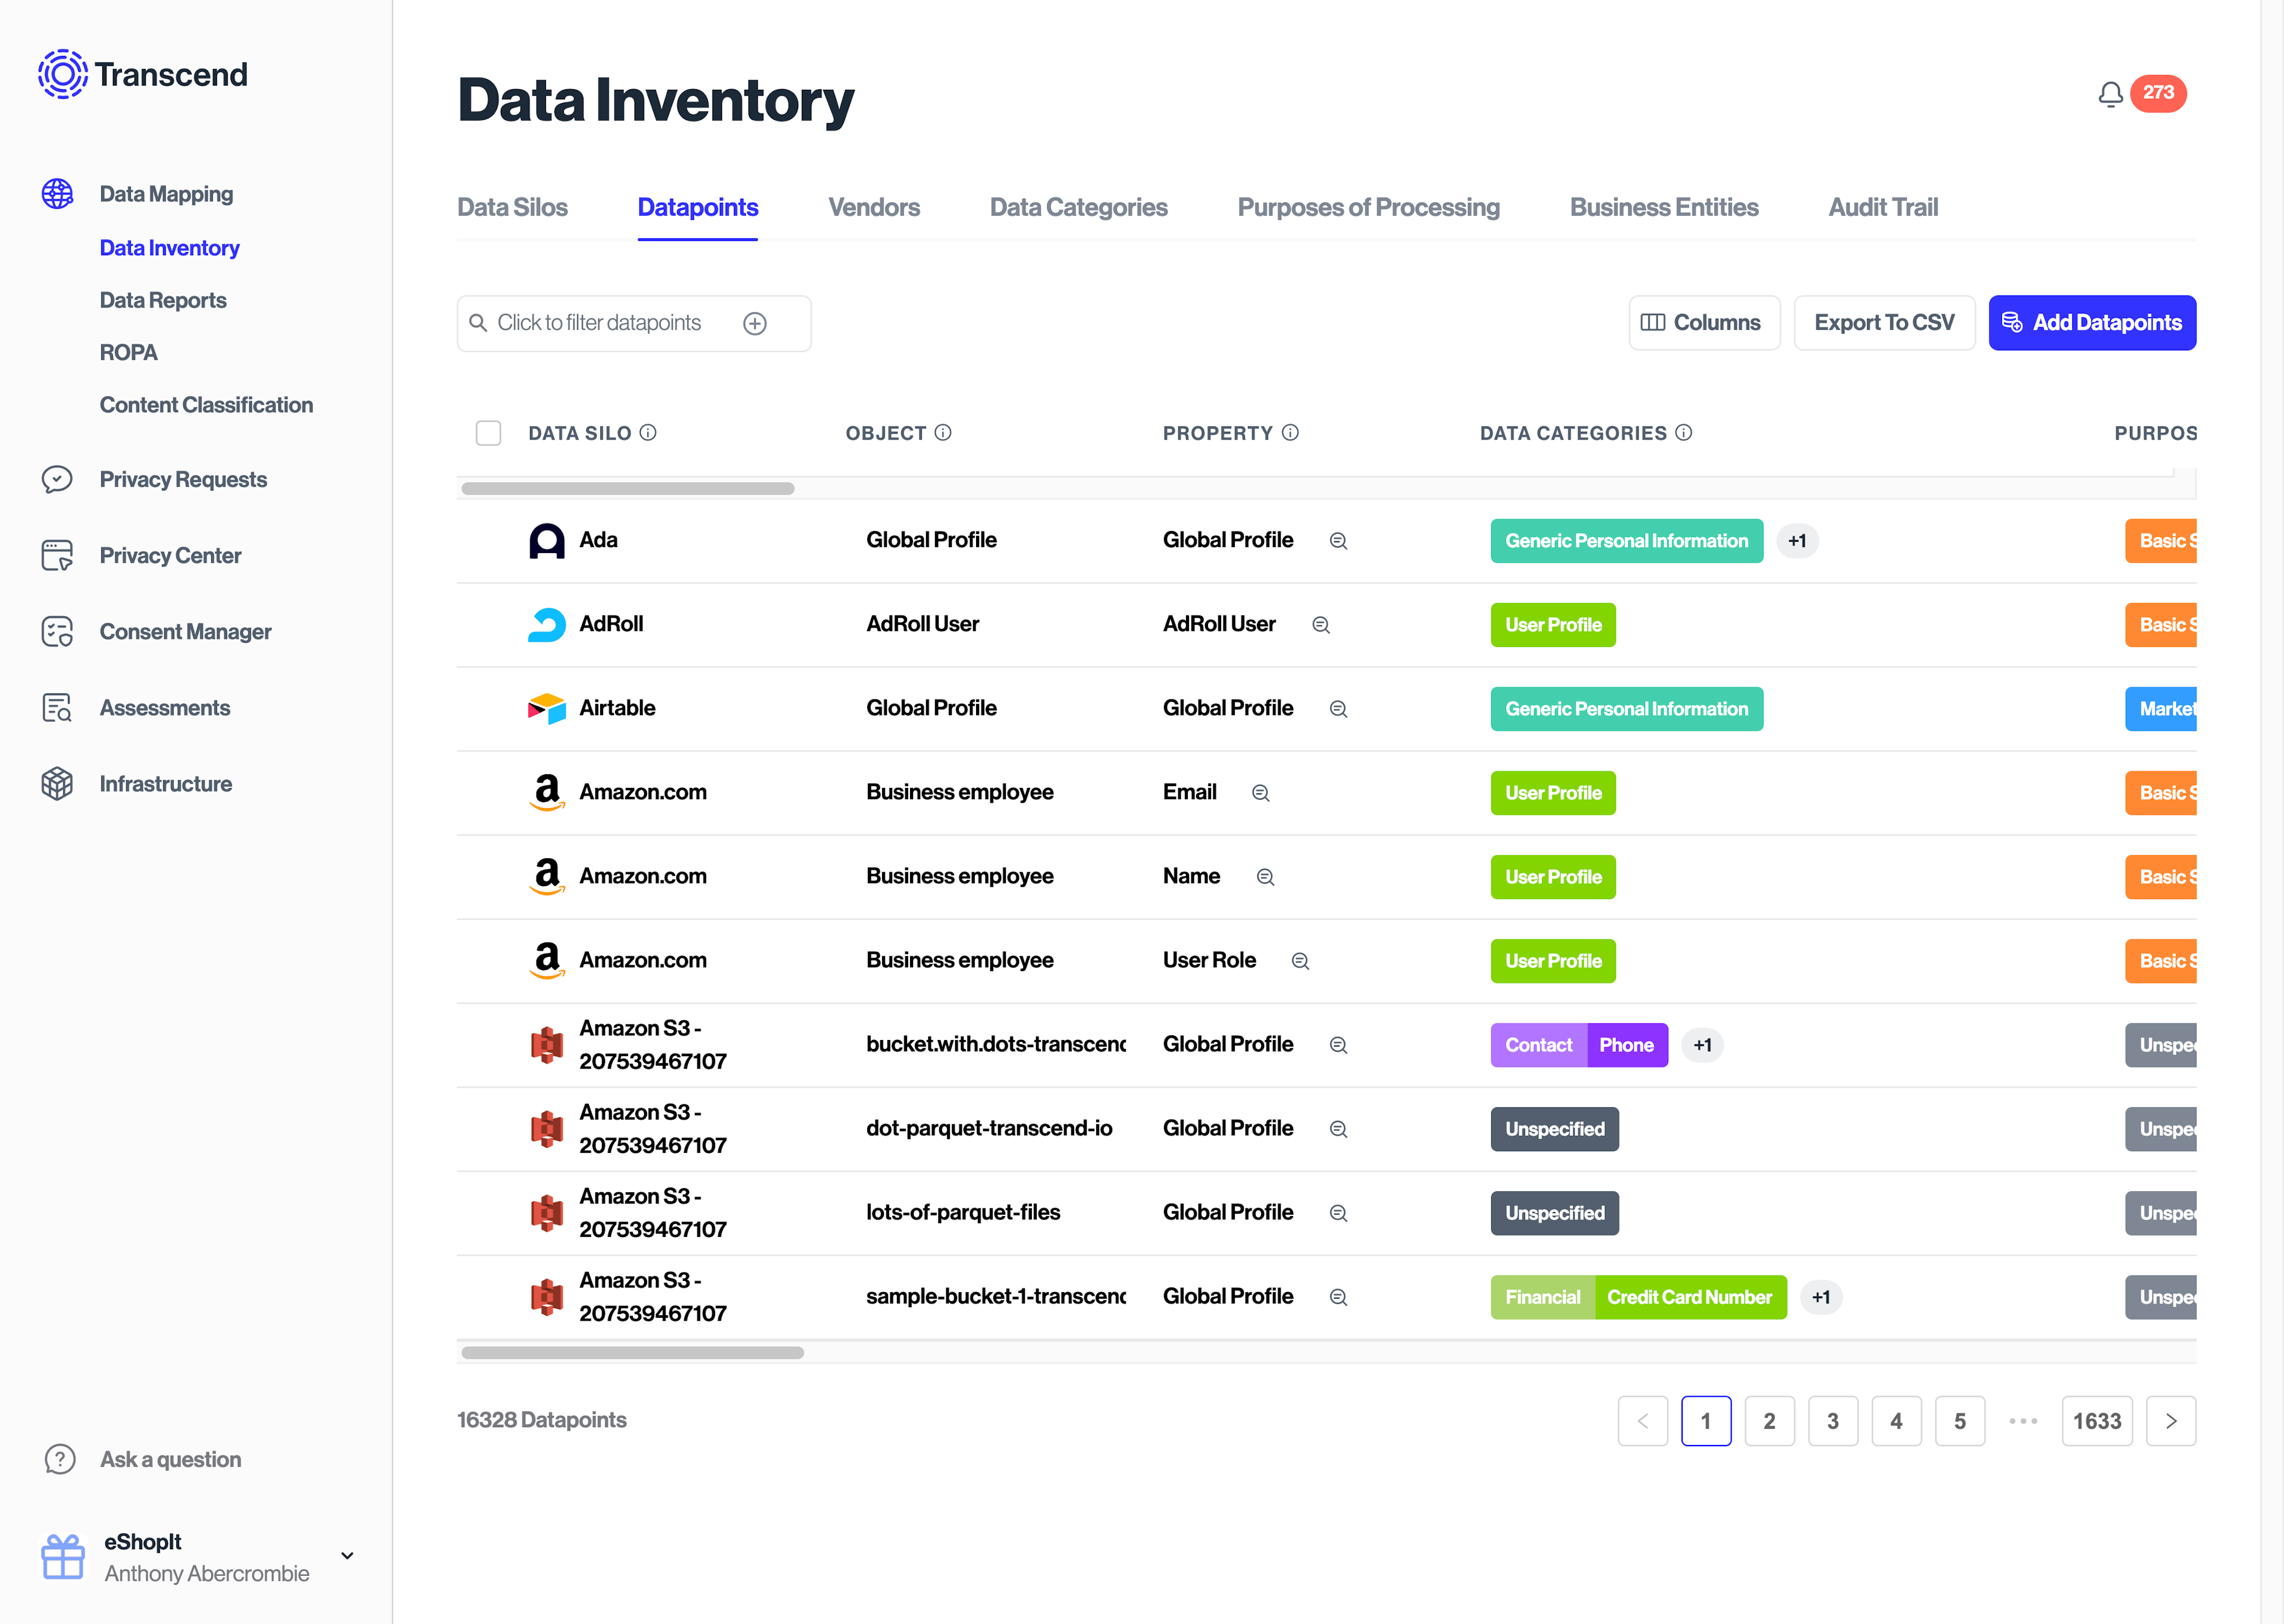 Data Inventory - Datapoints